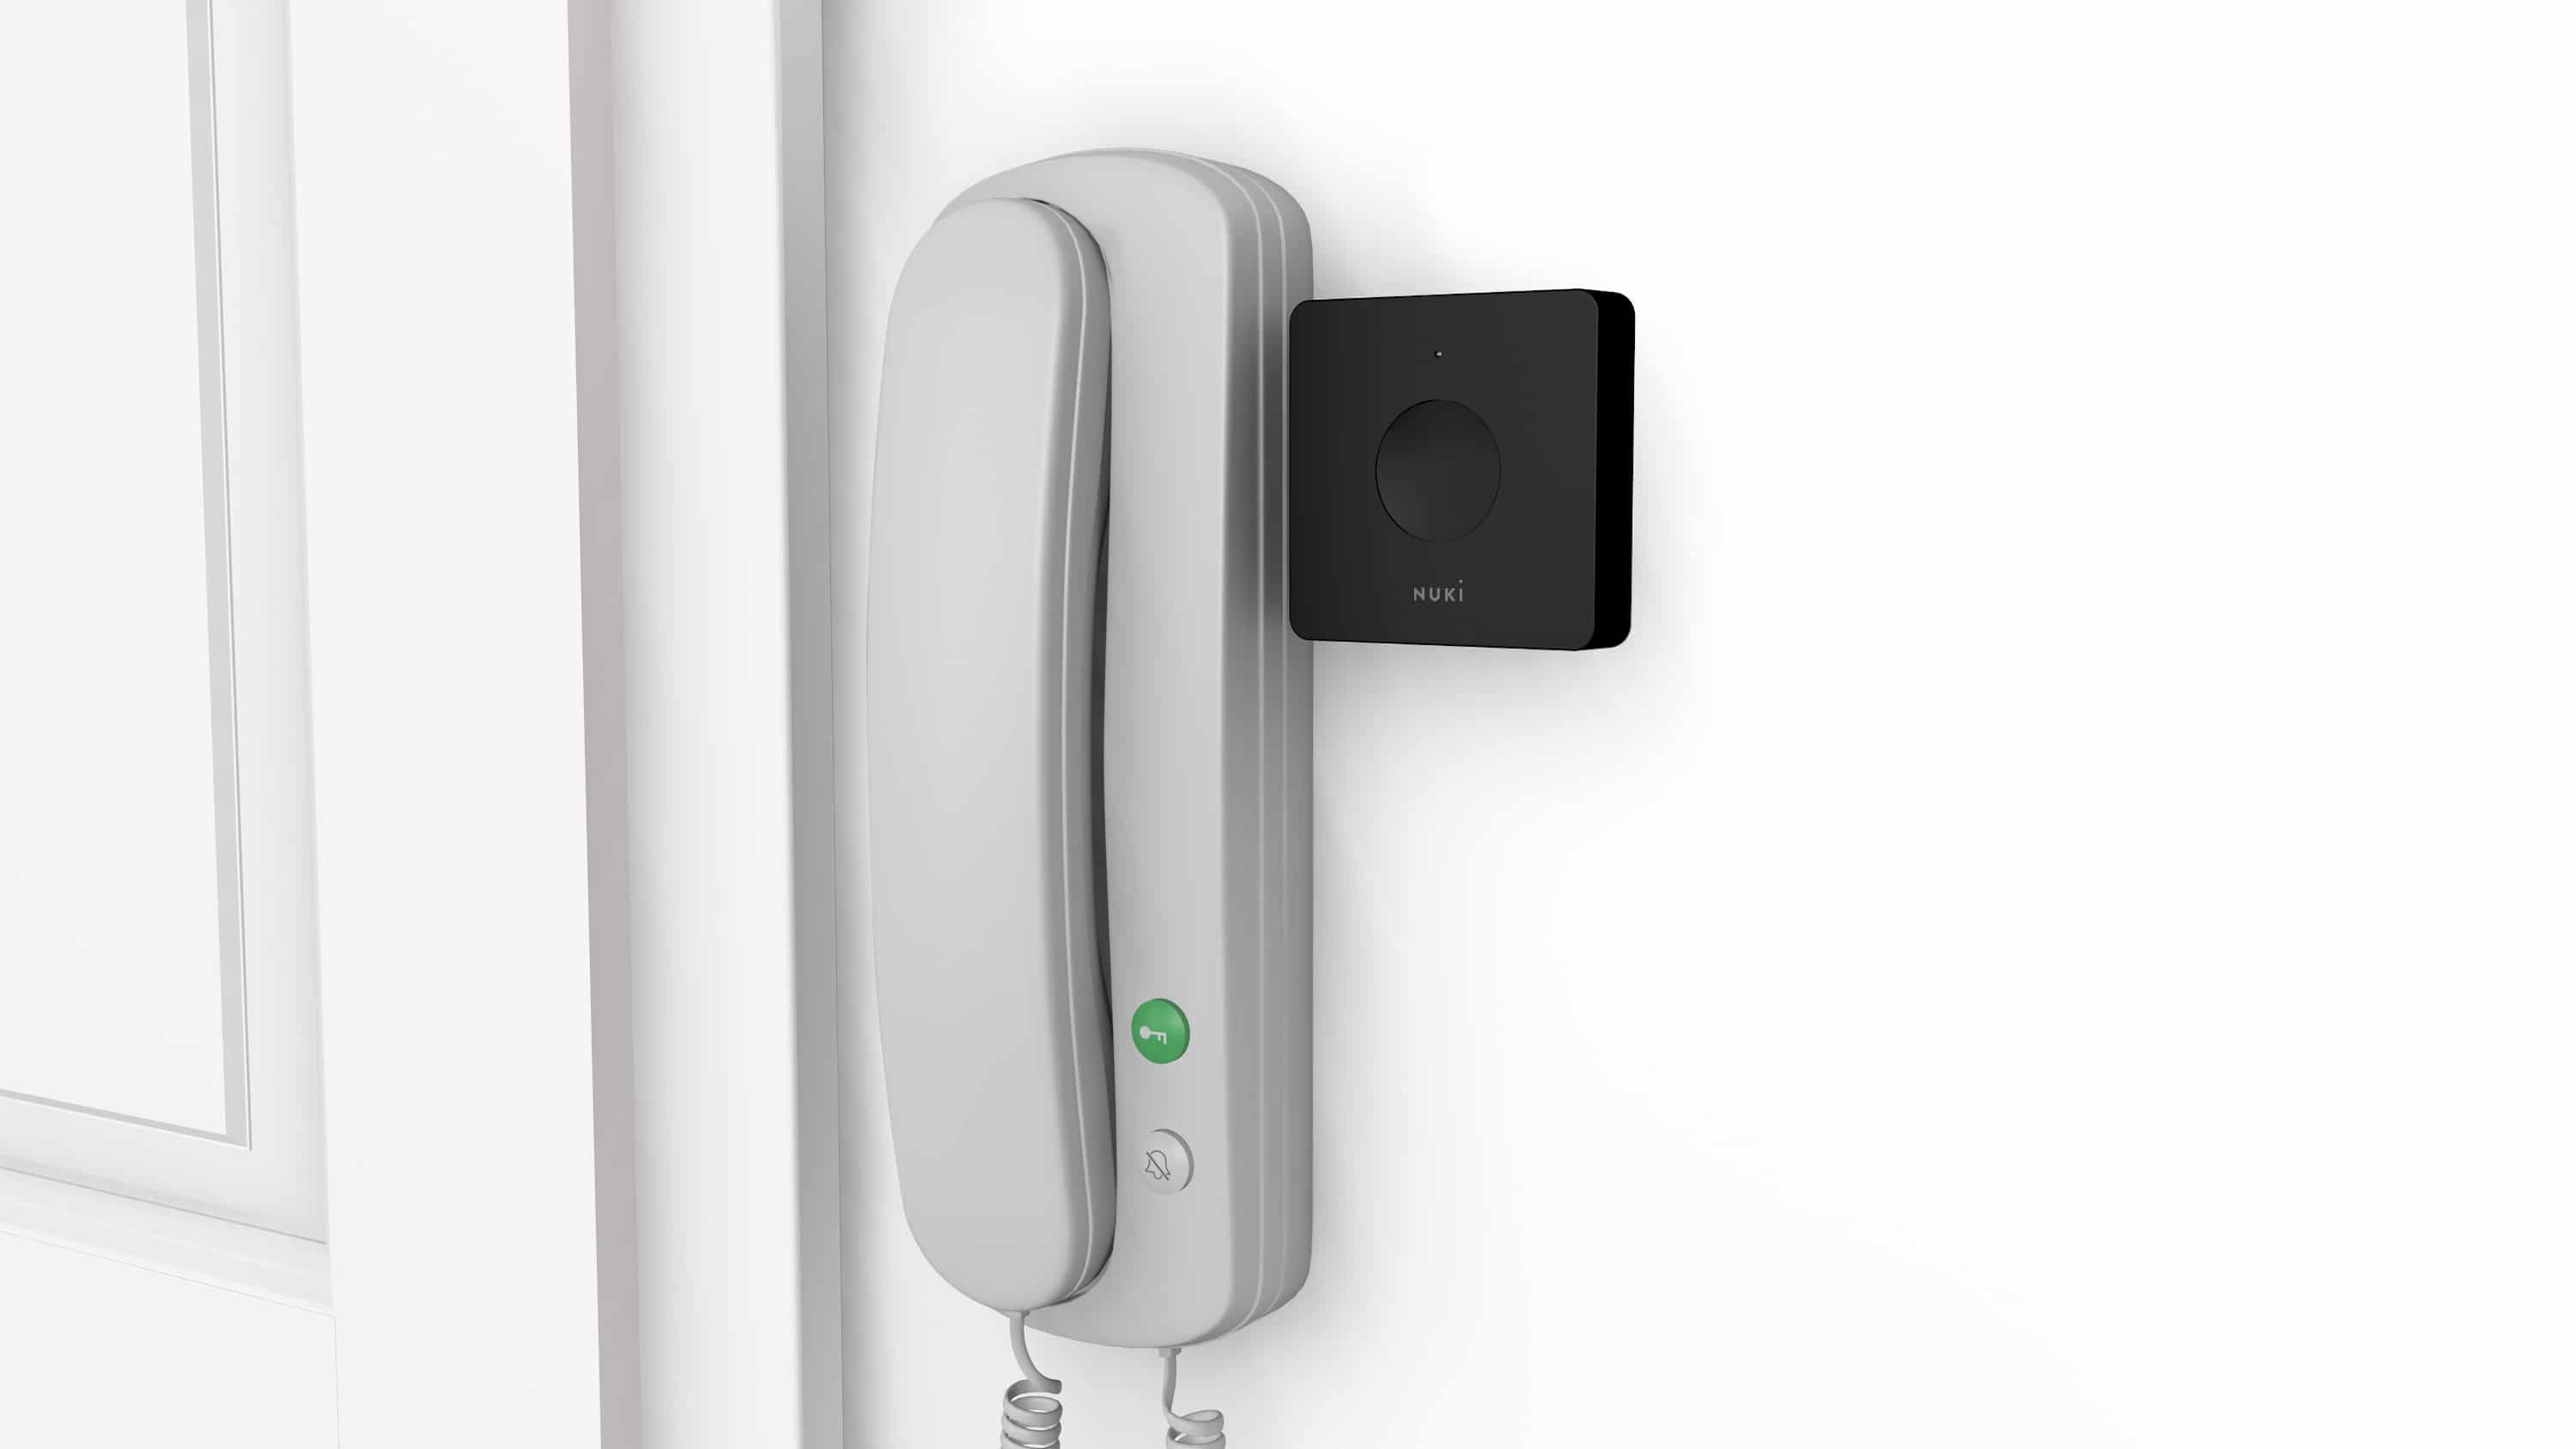 Nuki: Intercom Systems Can Be Upgraded with the Opener